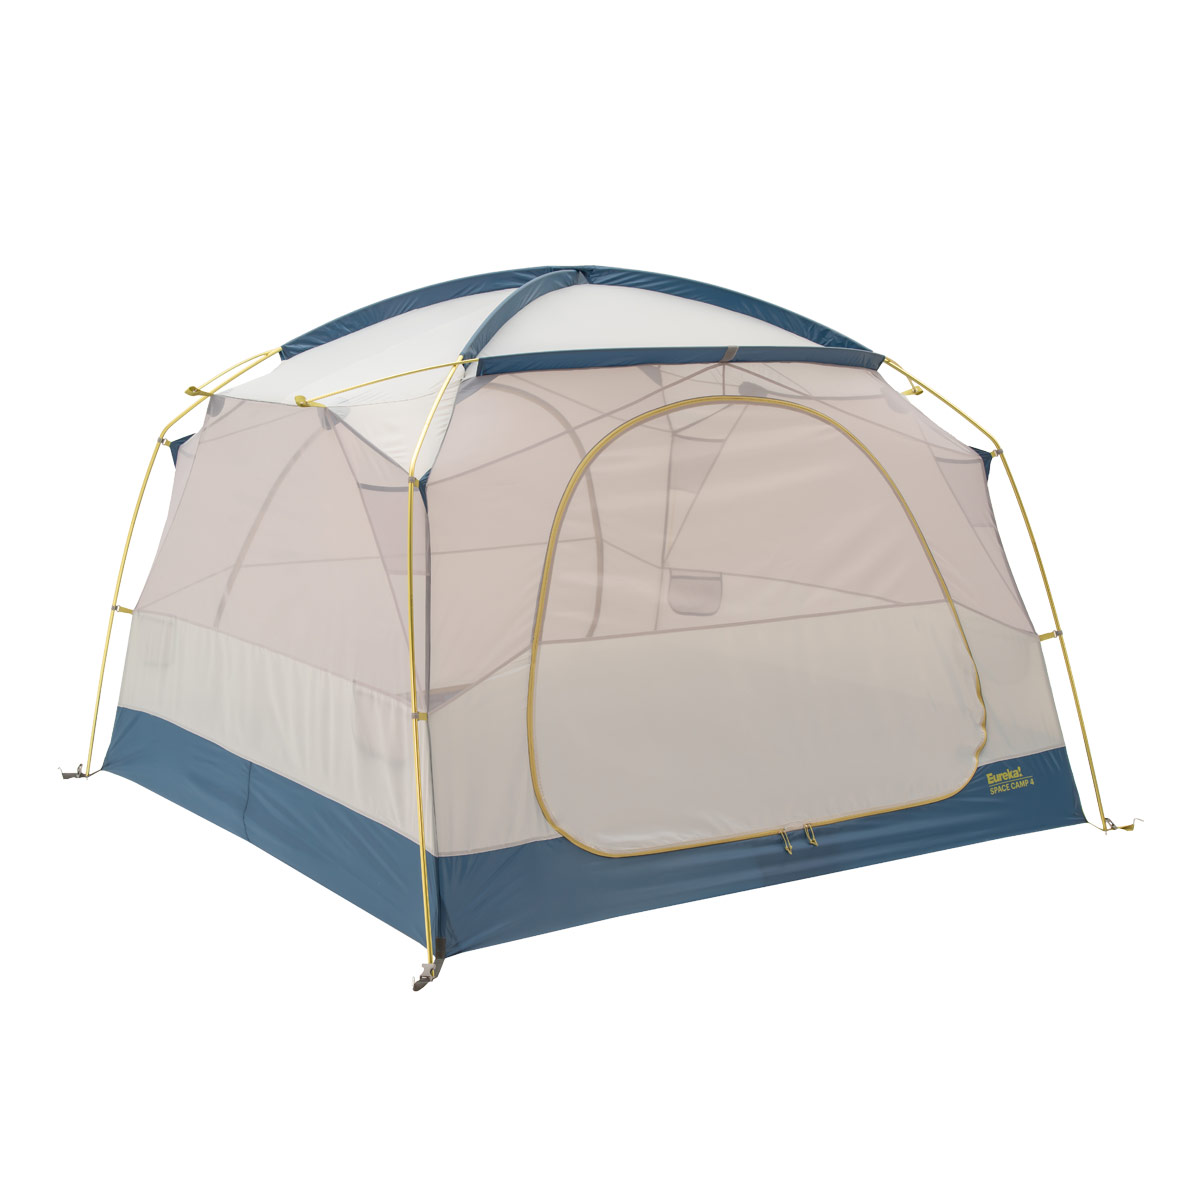 Space Camp 4 Person Tent